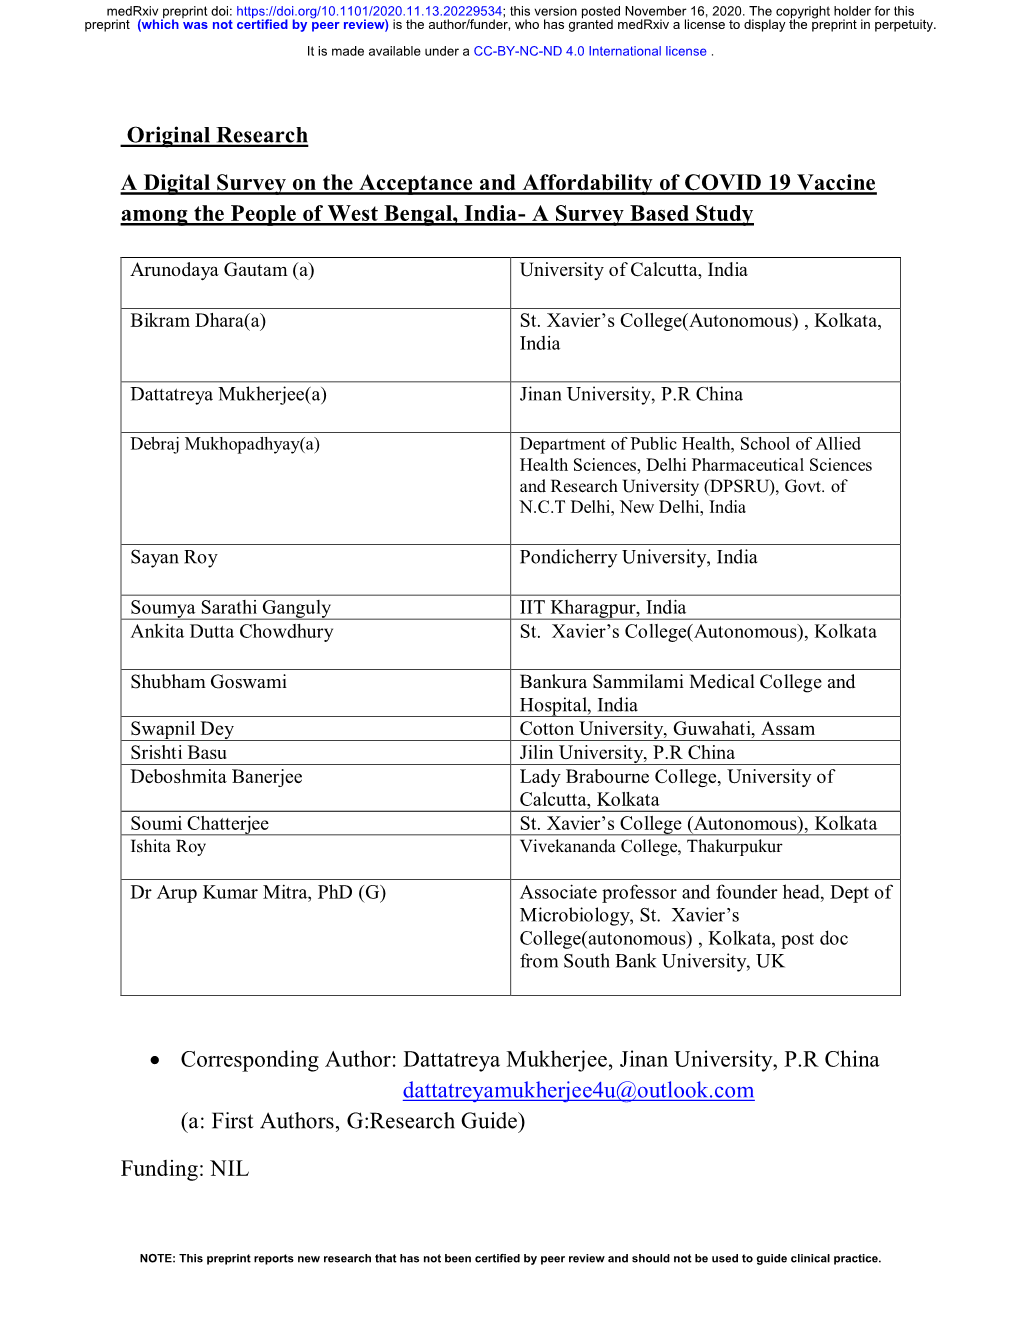 A Digital Survey on the Acceptance and Affordability of COVID 19 Vaccine Among the People of West Bengal, India- a Survey Based Study